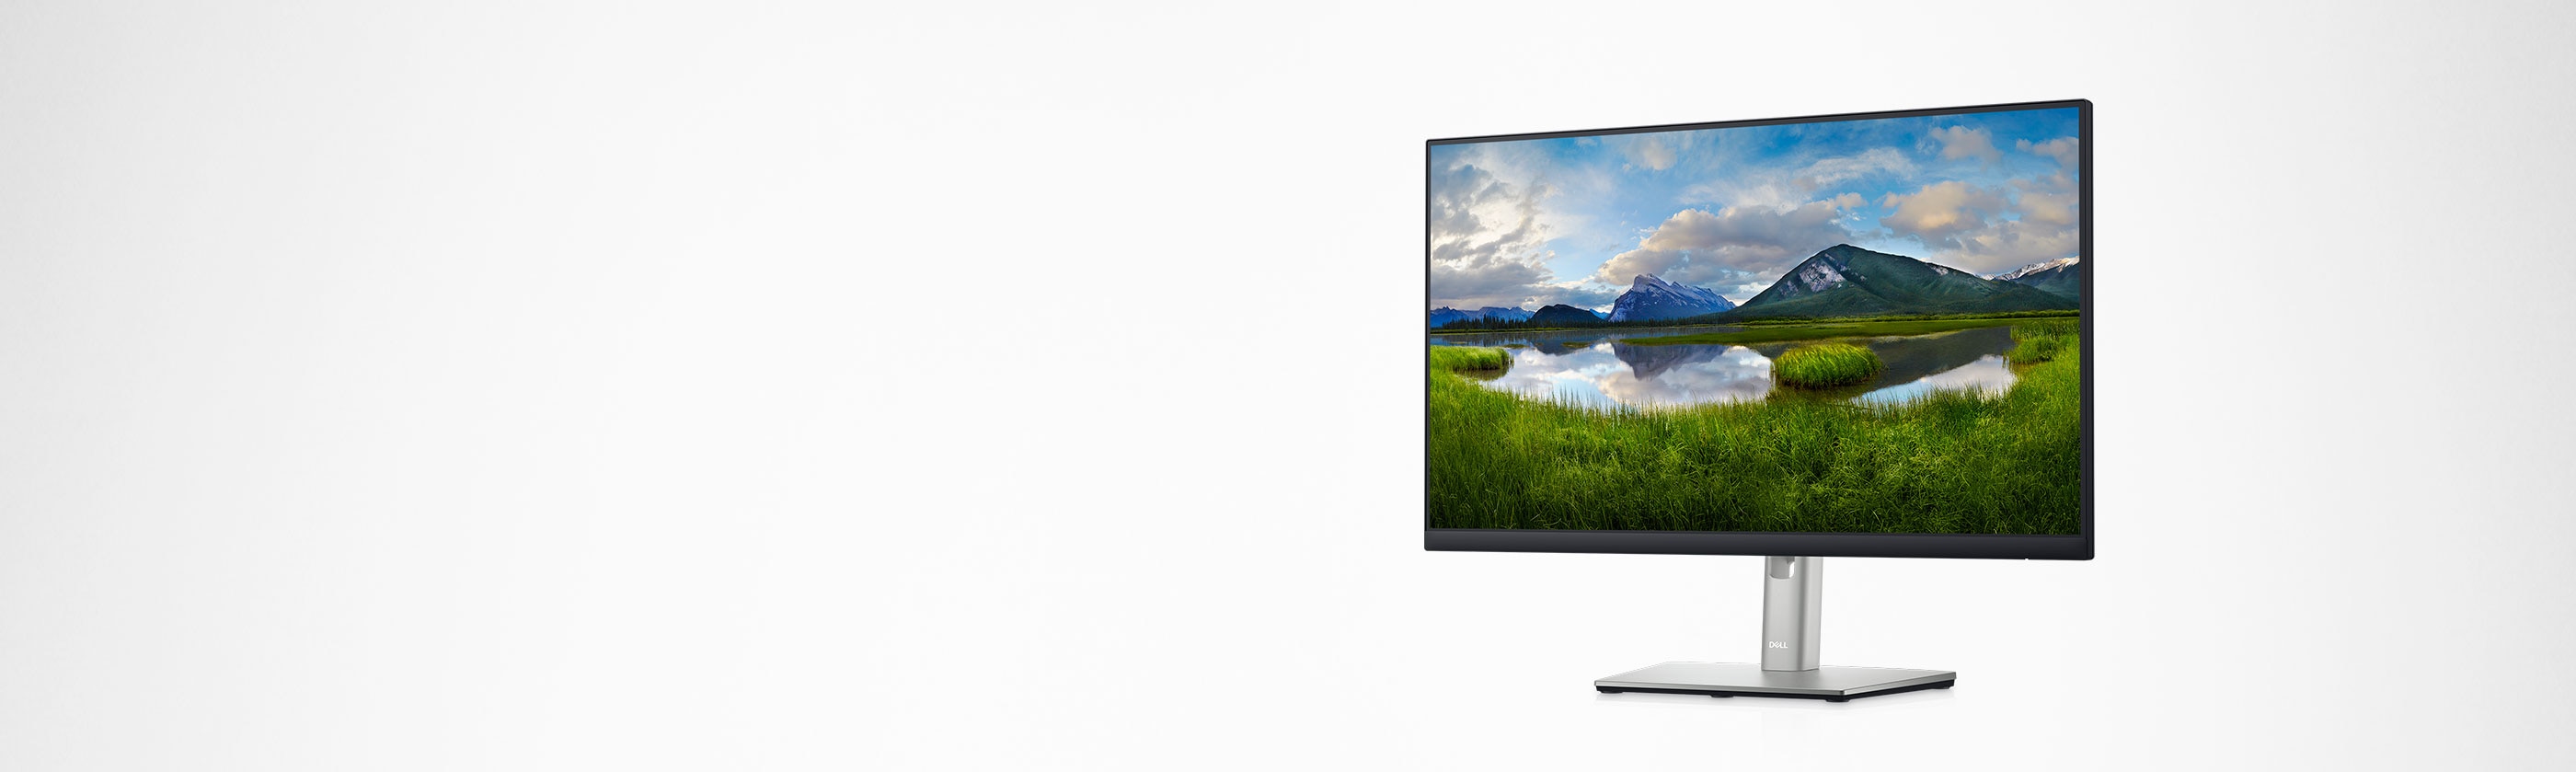 LCD vs LED Monitors  Which one should you buy? 